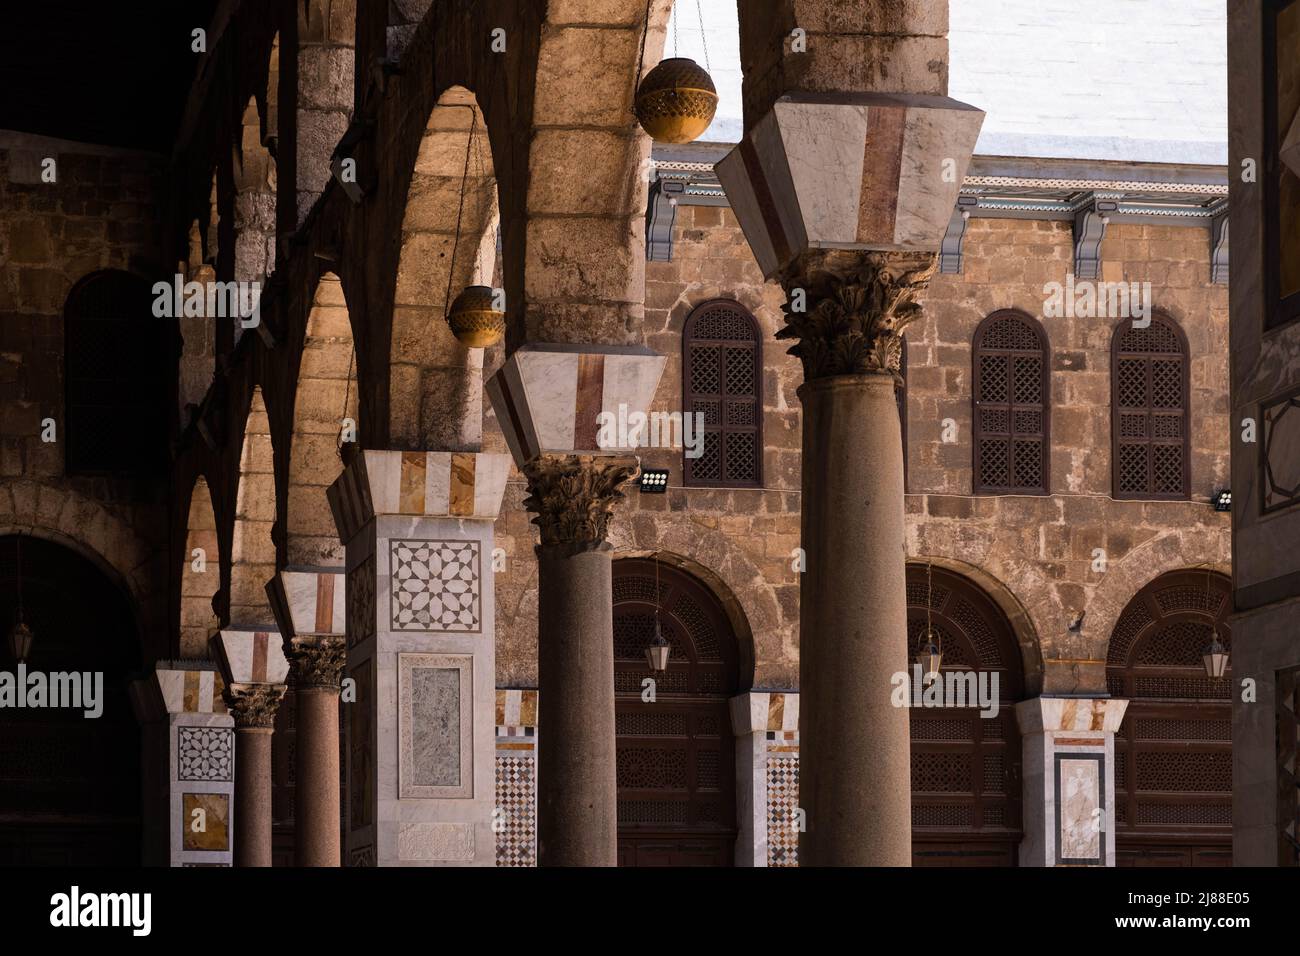 Damascus, Syria -May, 2022: Historic architecture details inside Umayyad Mosque,a.k.a. Great Mosque of Damascus Stock Photo